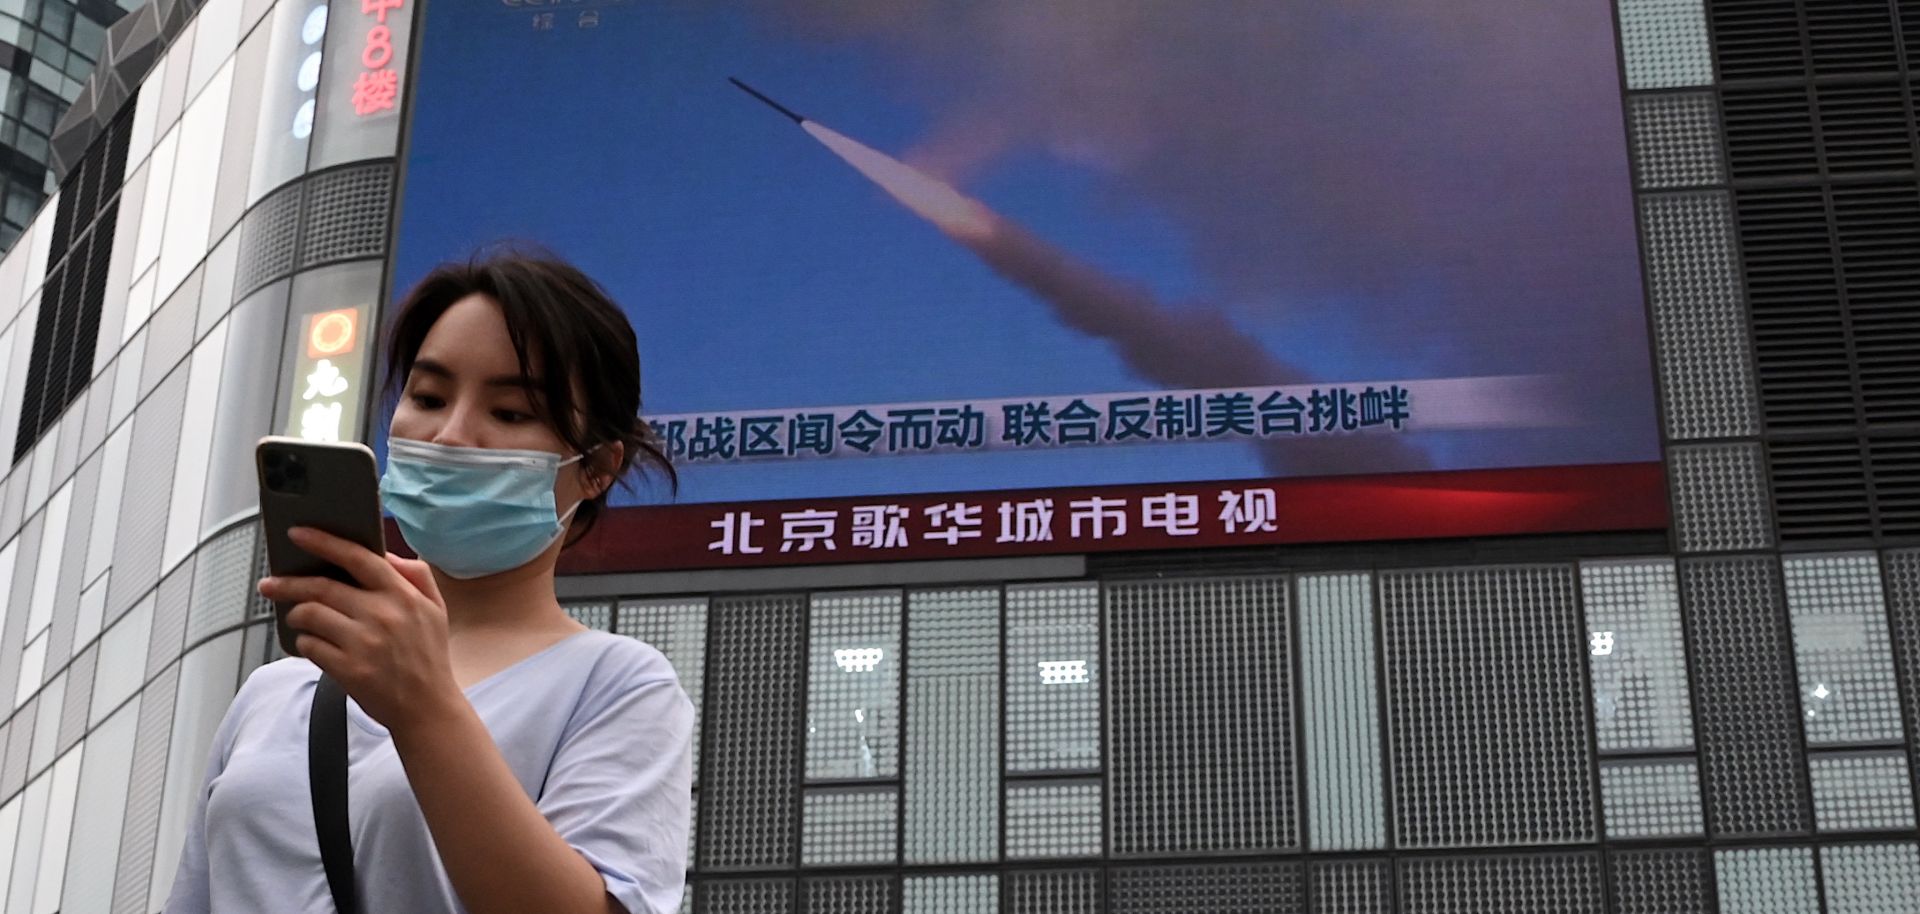 A woman in Beijing uses her mobile phone as she walks in front of a large screen showing a news broadcast about China's military exercises encircling Taiwan on Aug. 4.